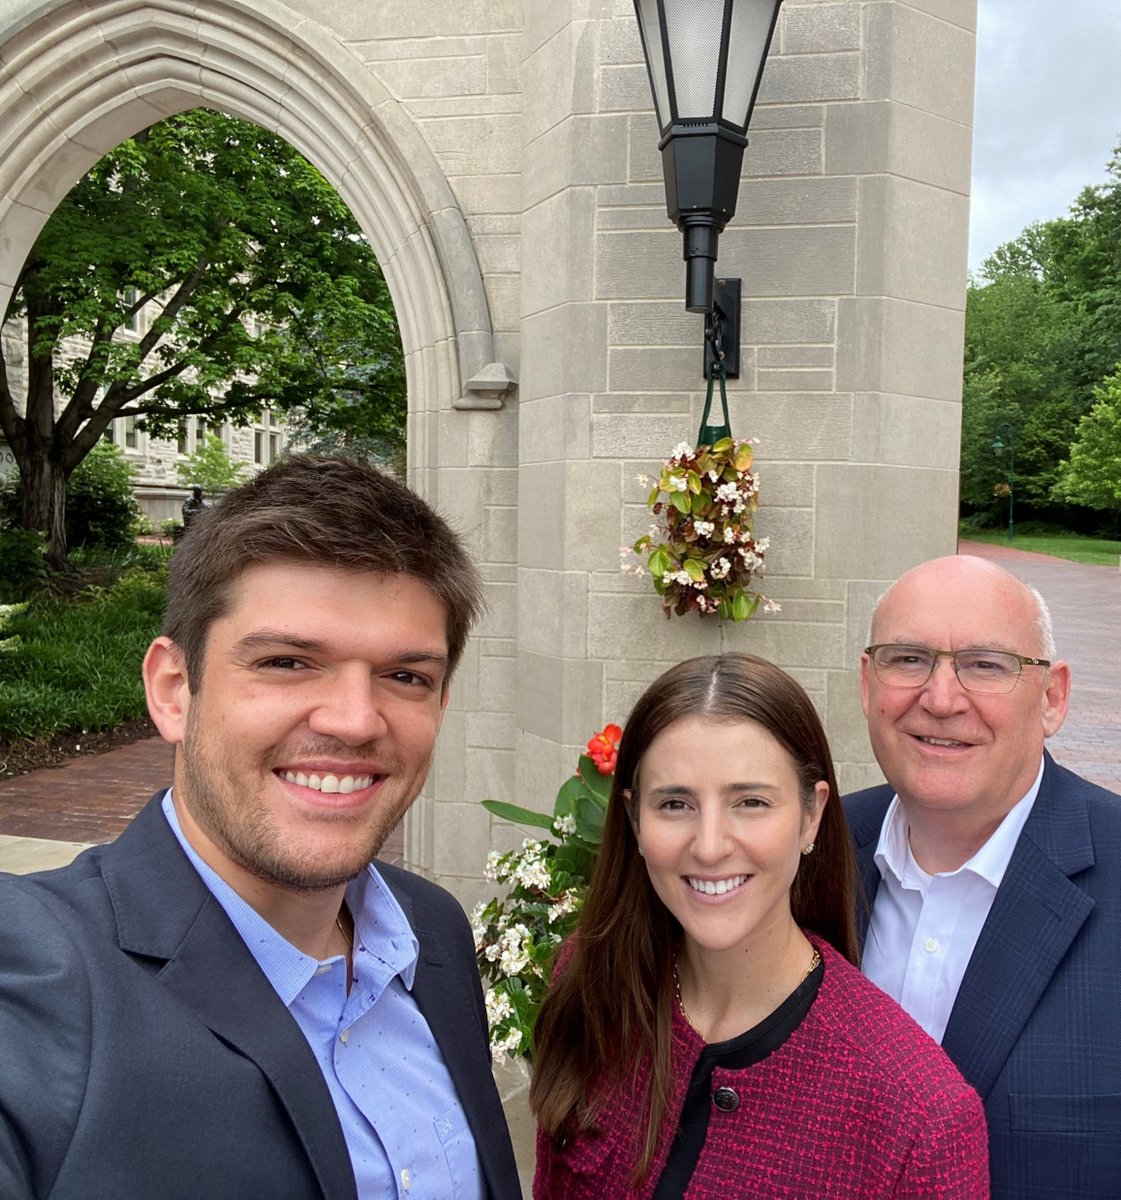 Great day @IndianaUniv participating in the @IUVentures summit and sharing time with former students from @iueast @iueredwolves @cicibellis and Joao Vitor De Lima. CiCi did a great job with her presentation during the summit. @Cartancapital @IU_Online @KelleyIndy @KelleySchool